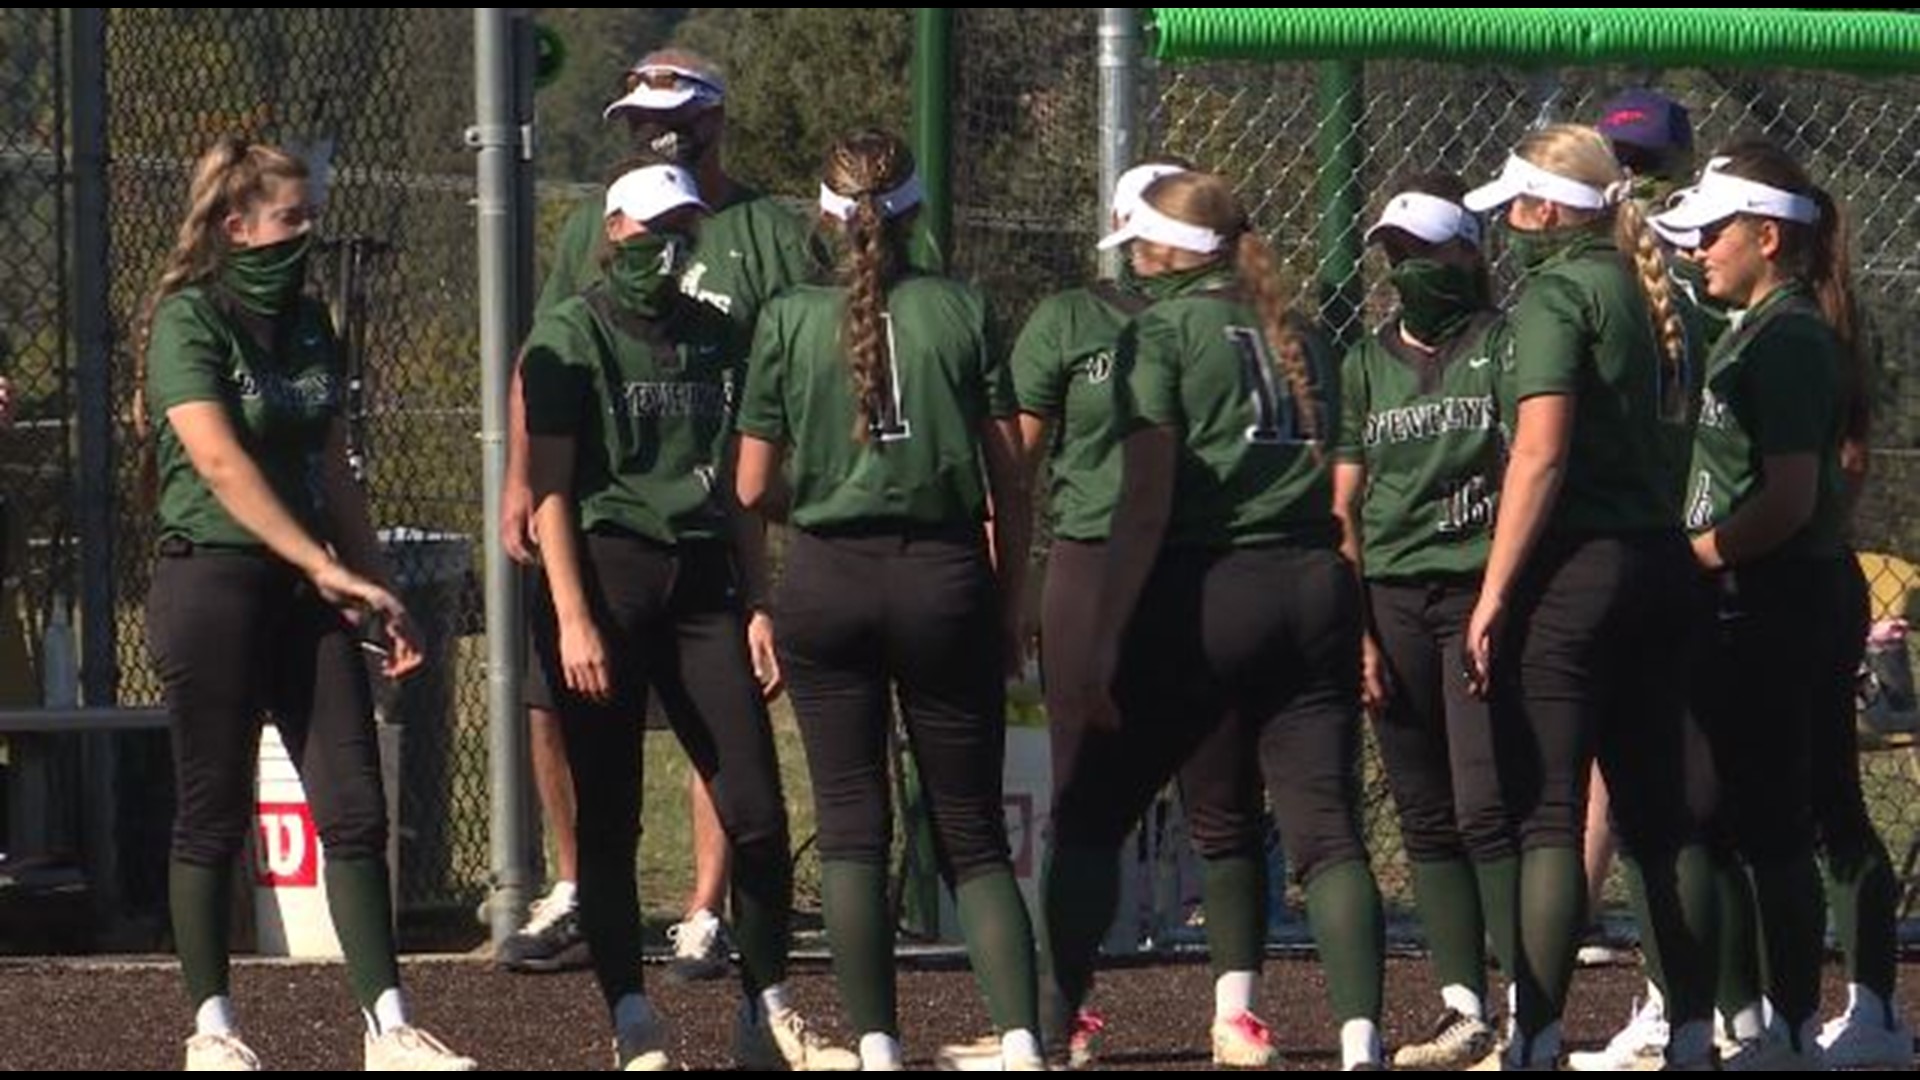 D'Evelyn took down 4A JeffCo league opponent Conifer 11-4 on Tuesday night to cap off a 15-1, 7-1 regular season record.